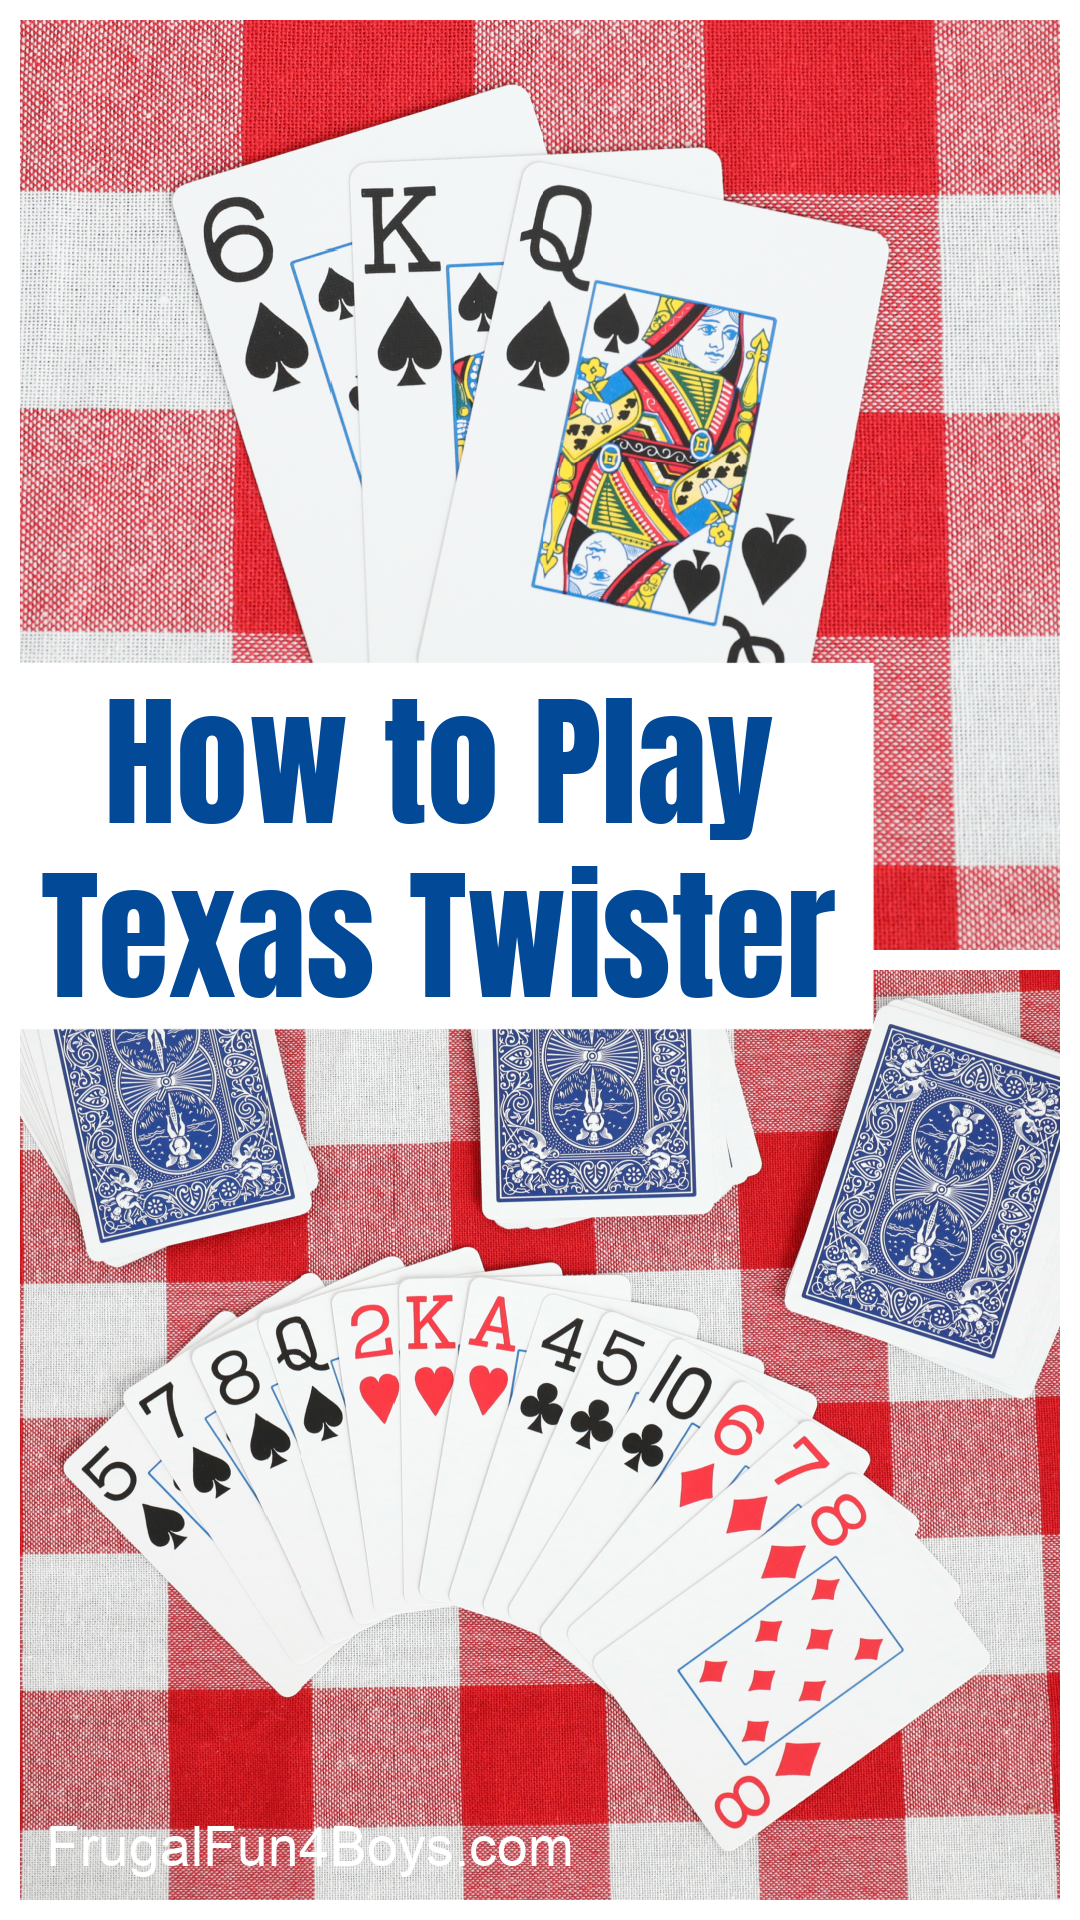 How to Play Texas Twister